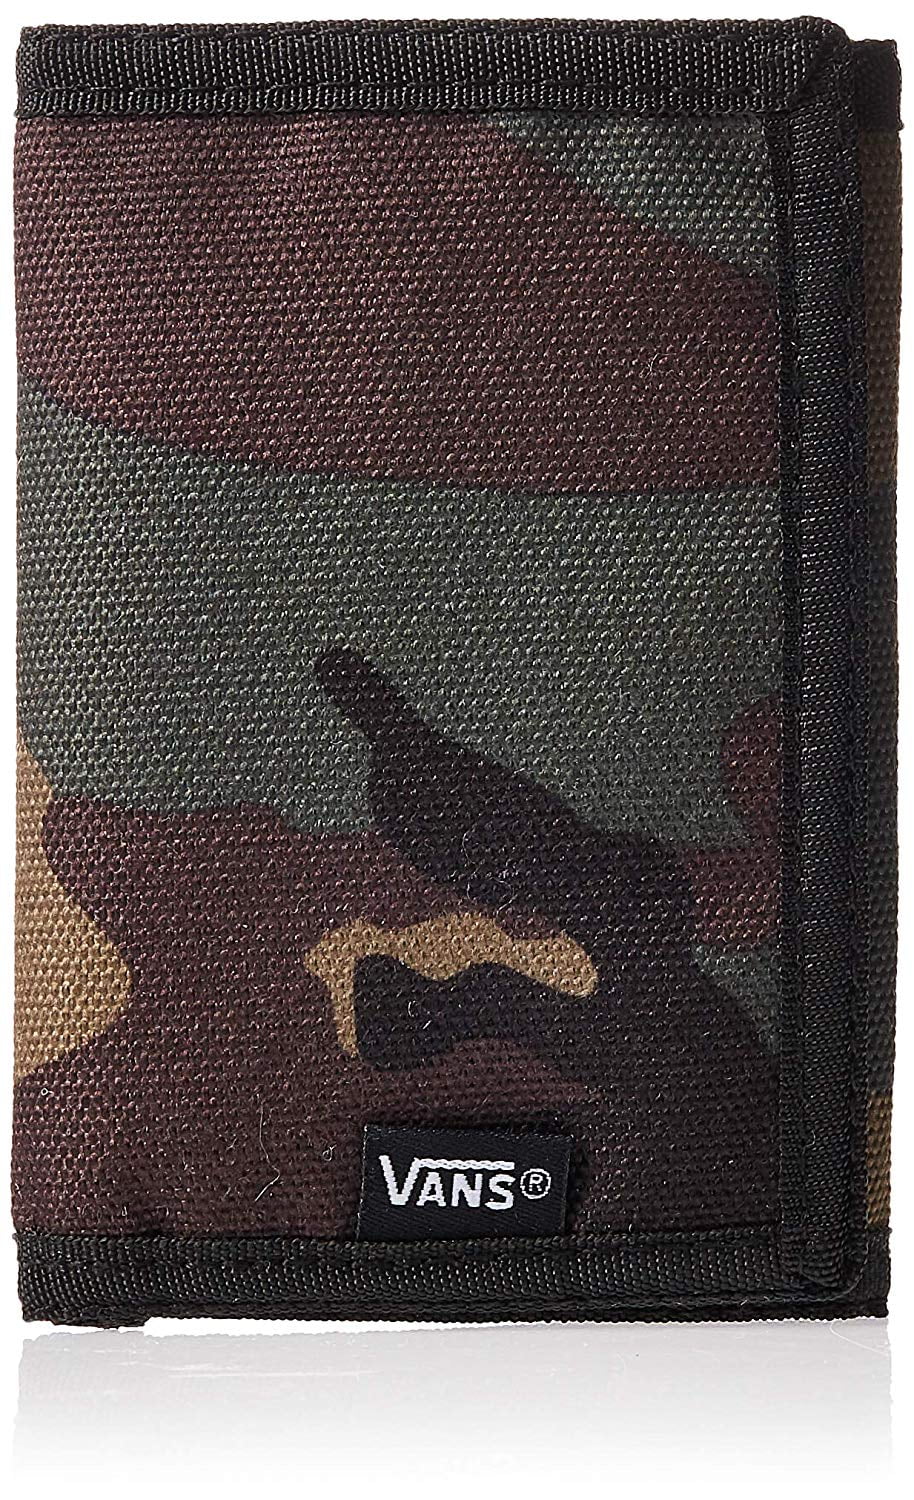 Vans Off The Wall Men's The Slipped Trifold Camo Wallet - Walmart.com